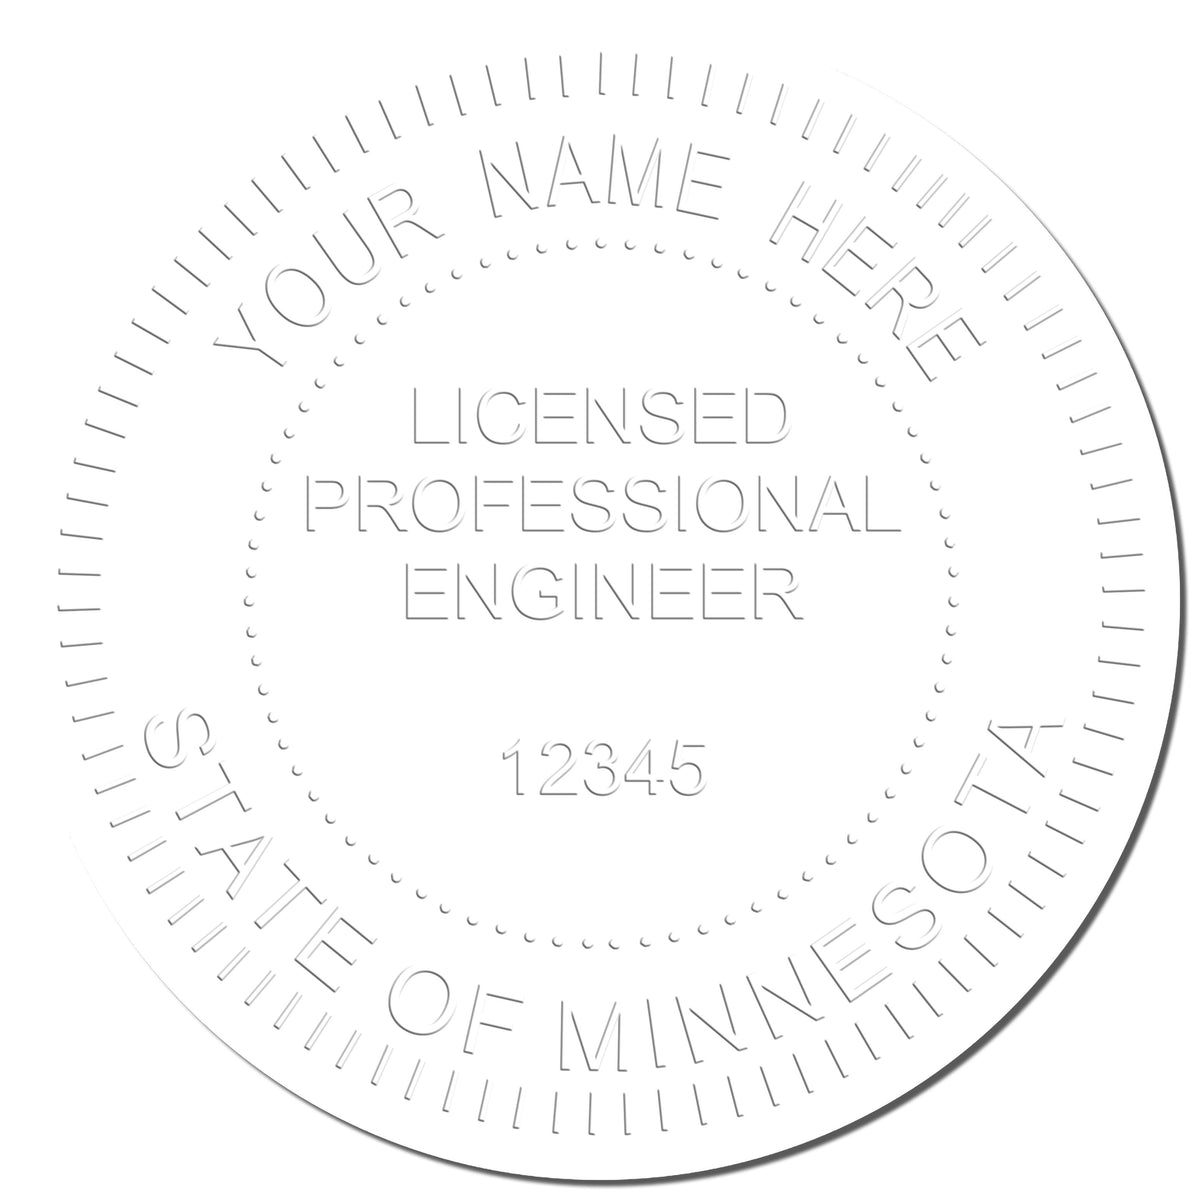 This paper is stamped with a sample imprint of the Hybrid Minnesota Engineer Seal, signifying its quality and reliability.